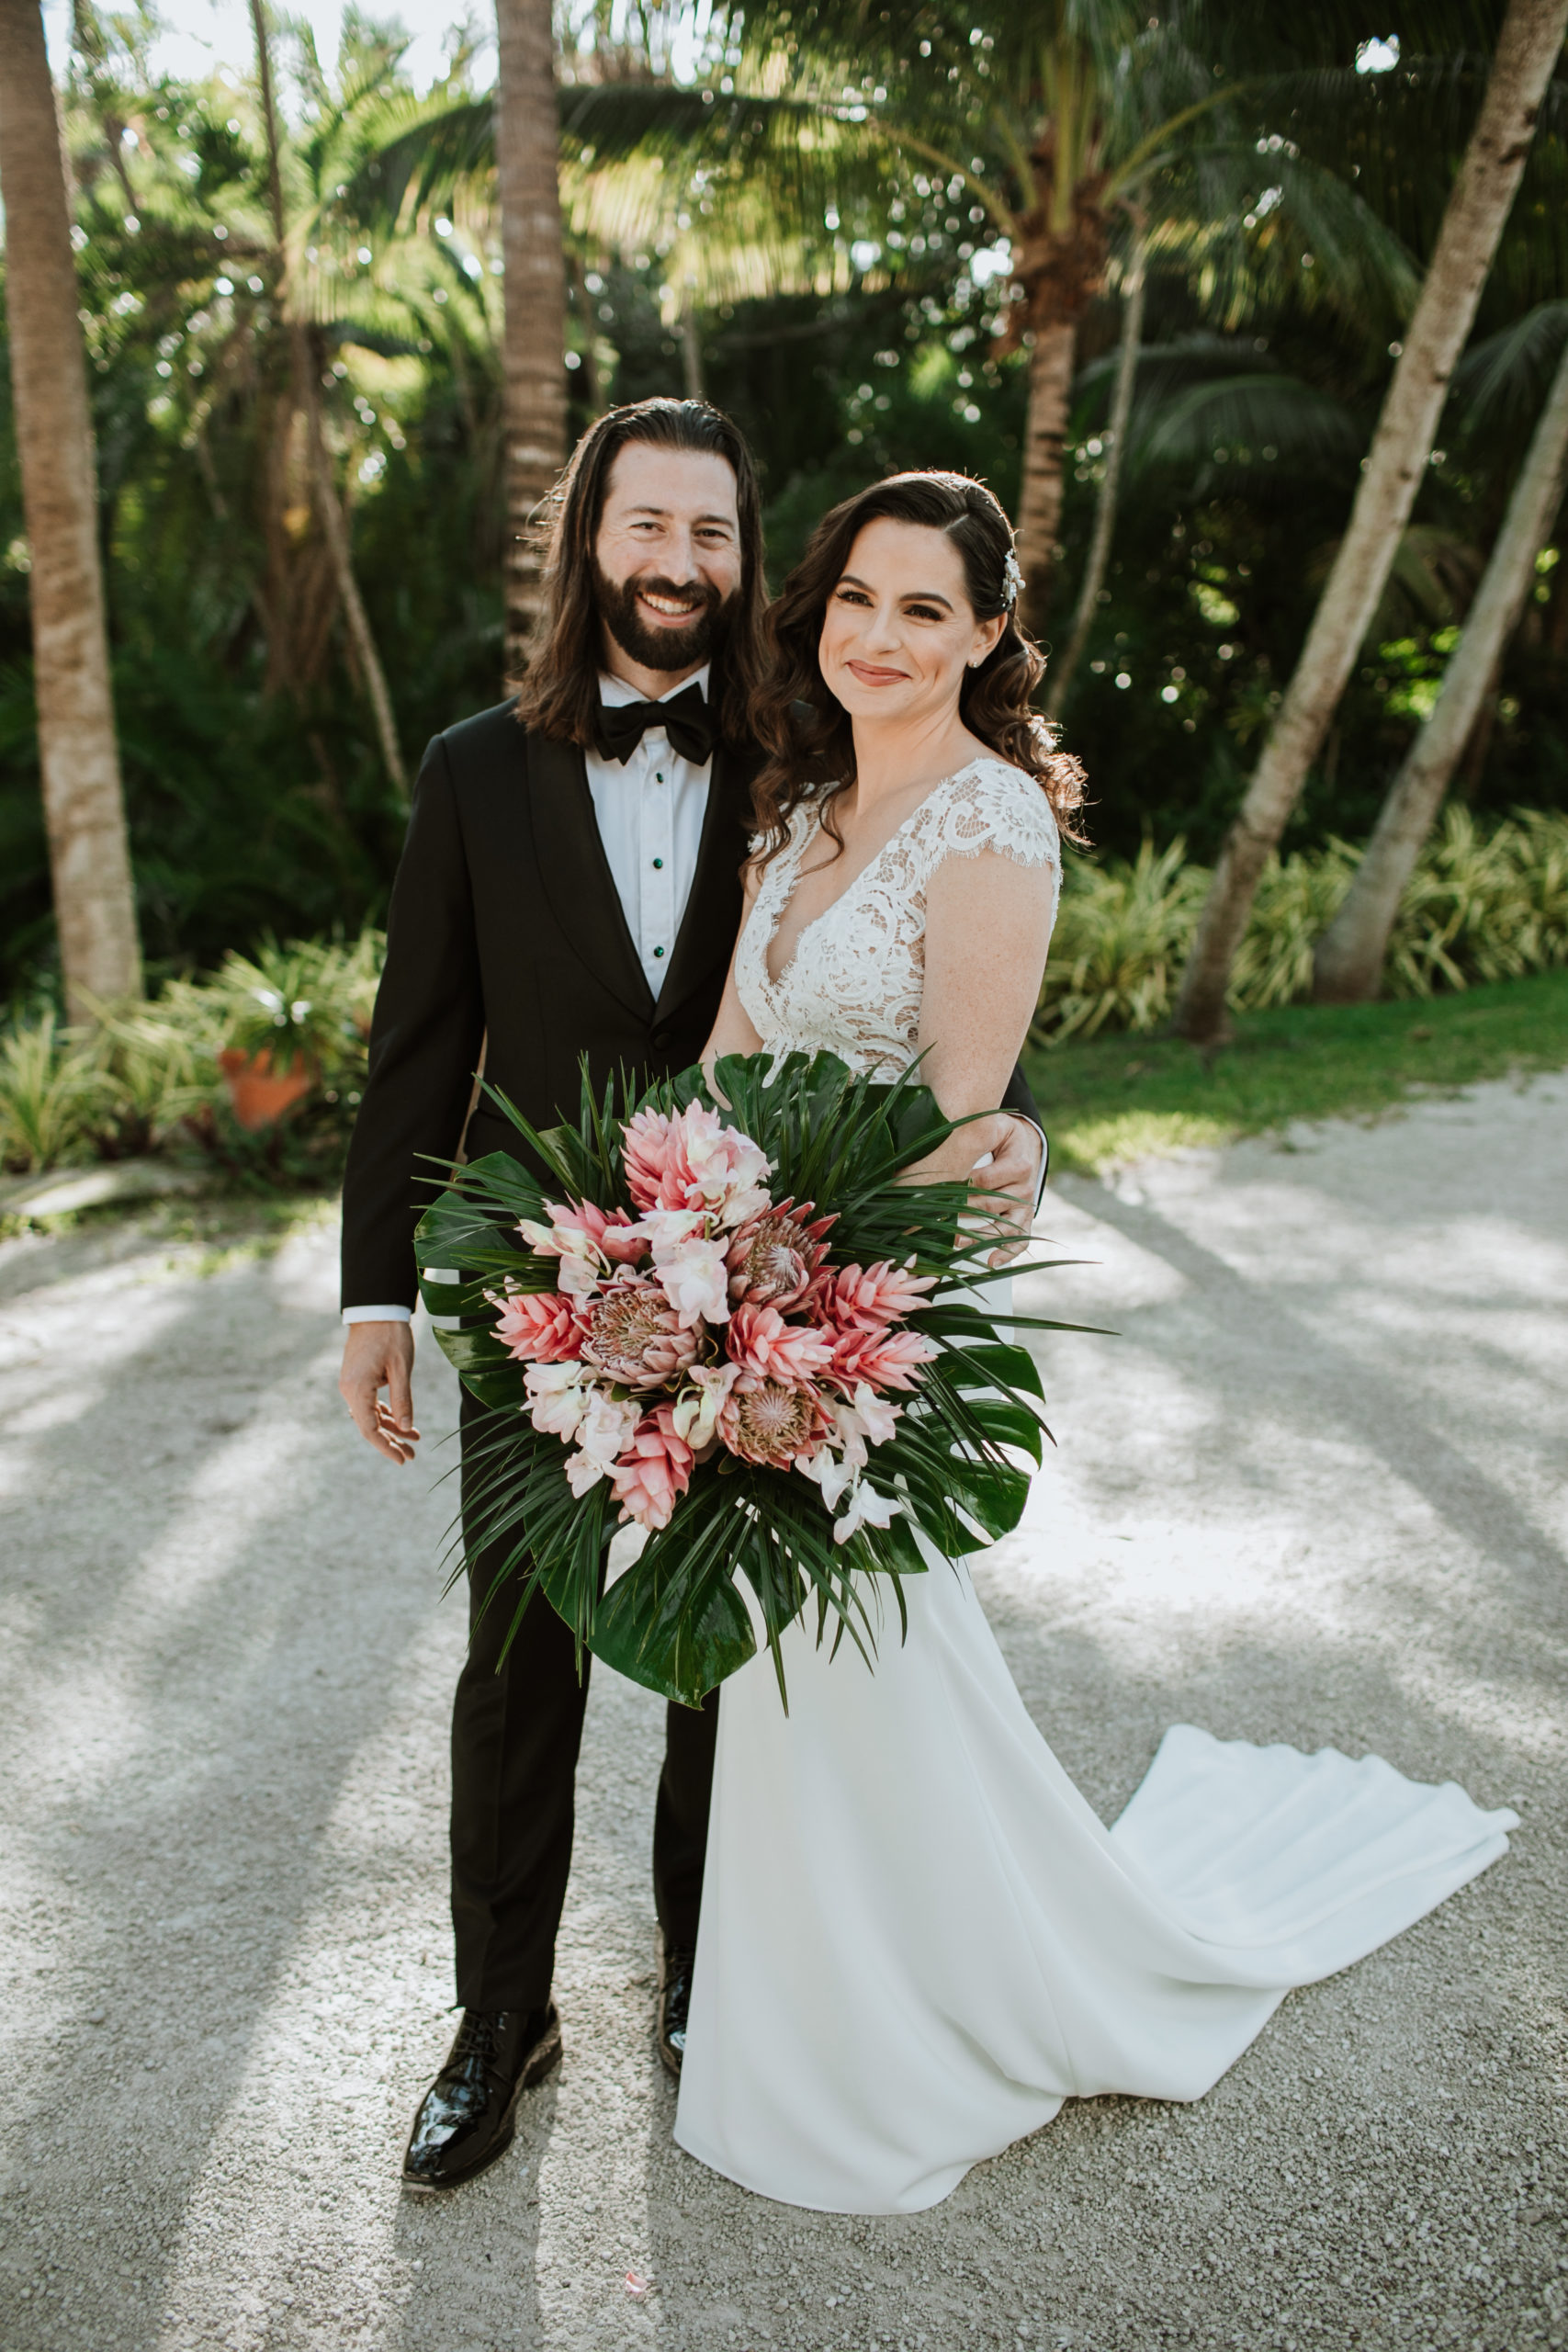 Lovely portrait of the bride and groom with the wedding bouquet outdoors at the Bonnet House Museum & Gardens, wedding planned by Oh My Occasions